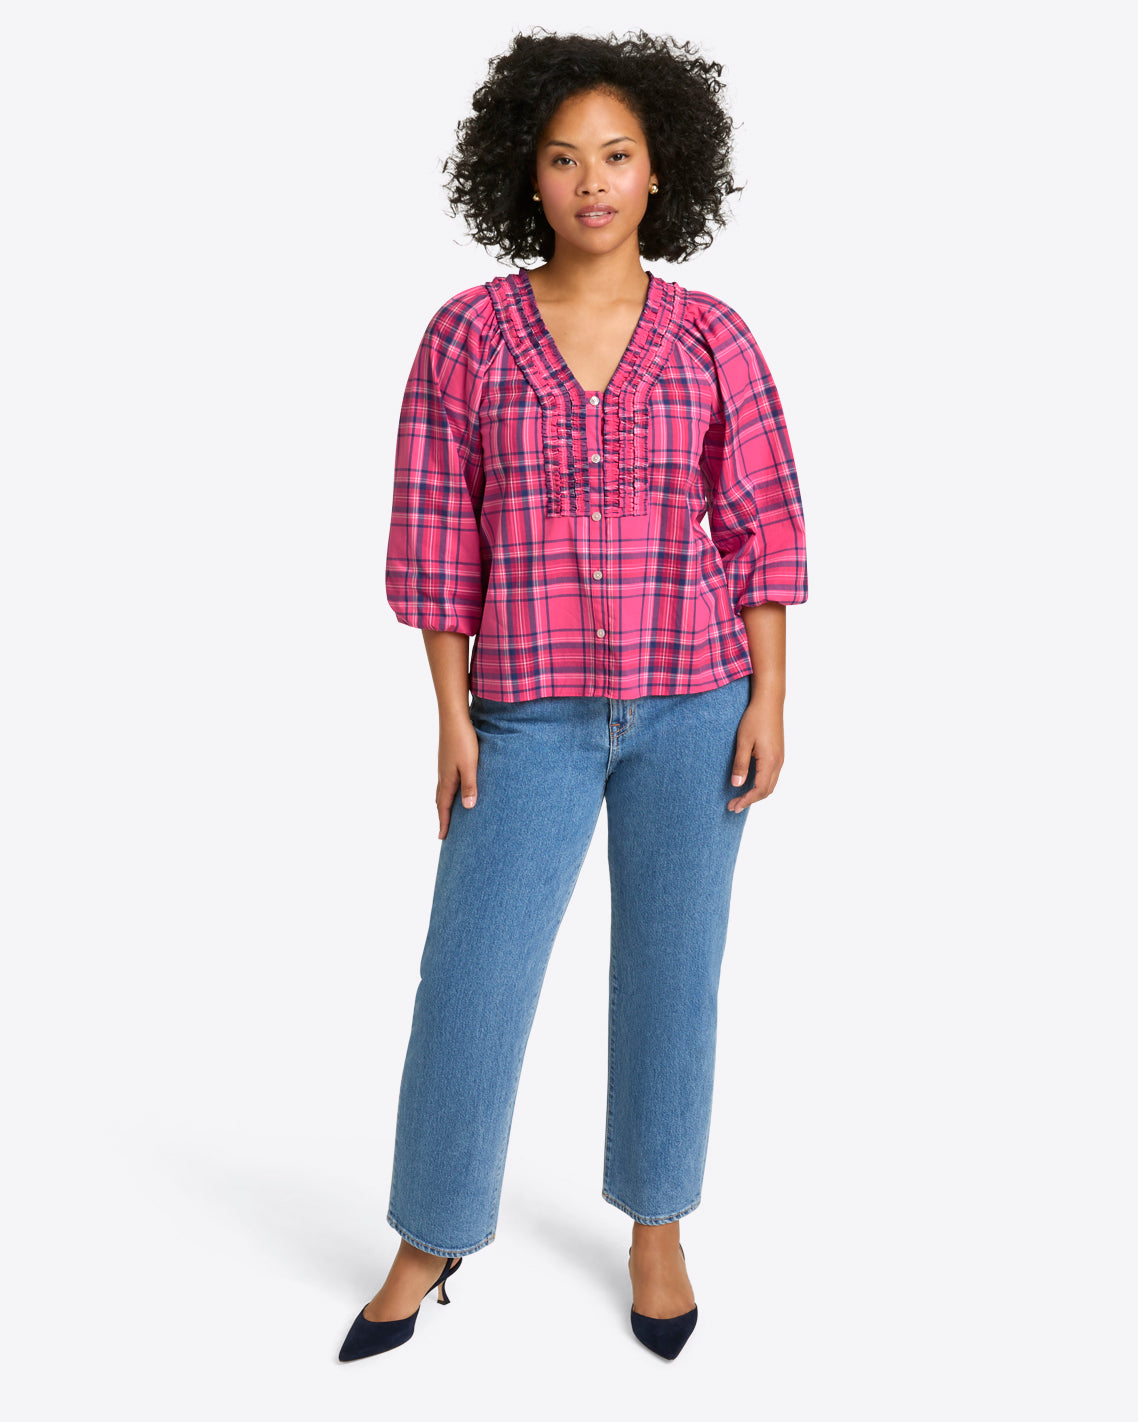 Aubrie Top in Pink Angie Plaid